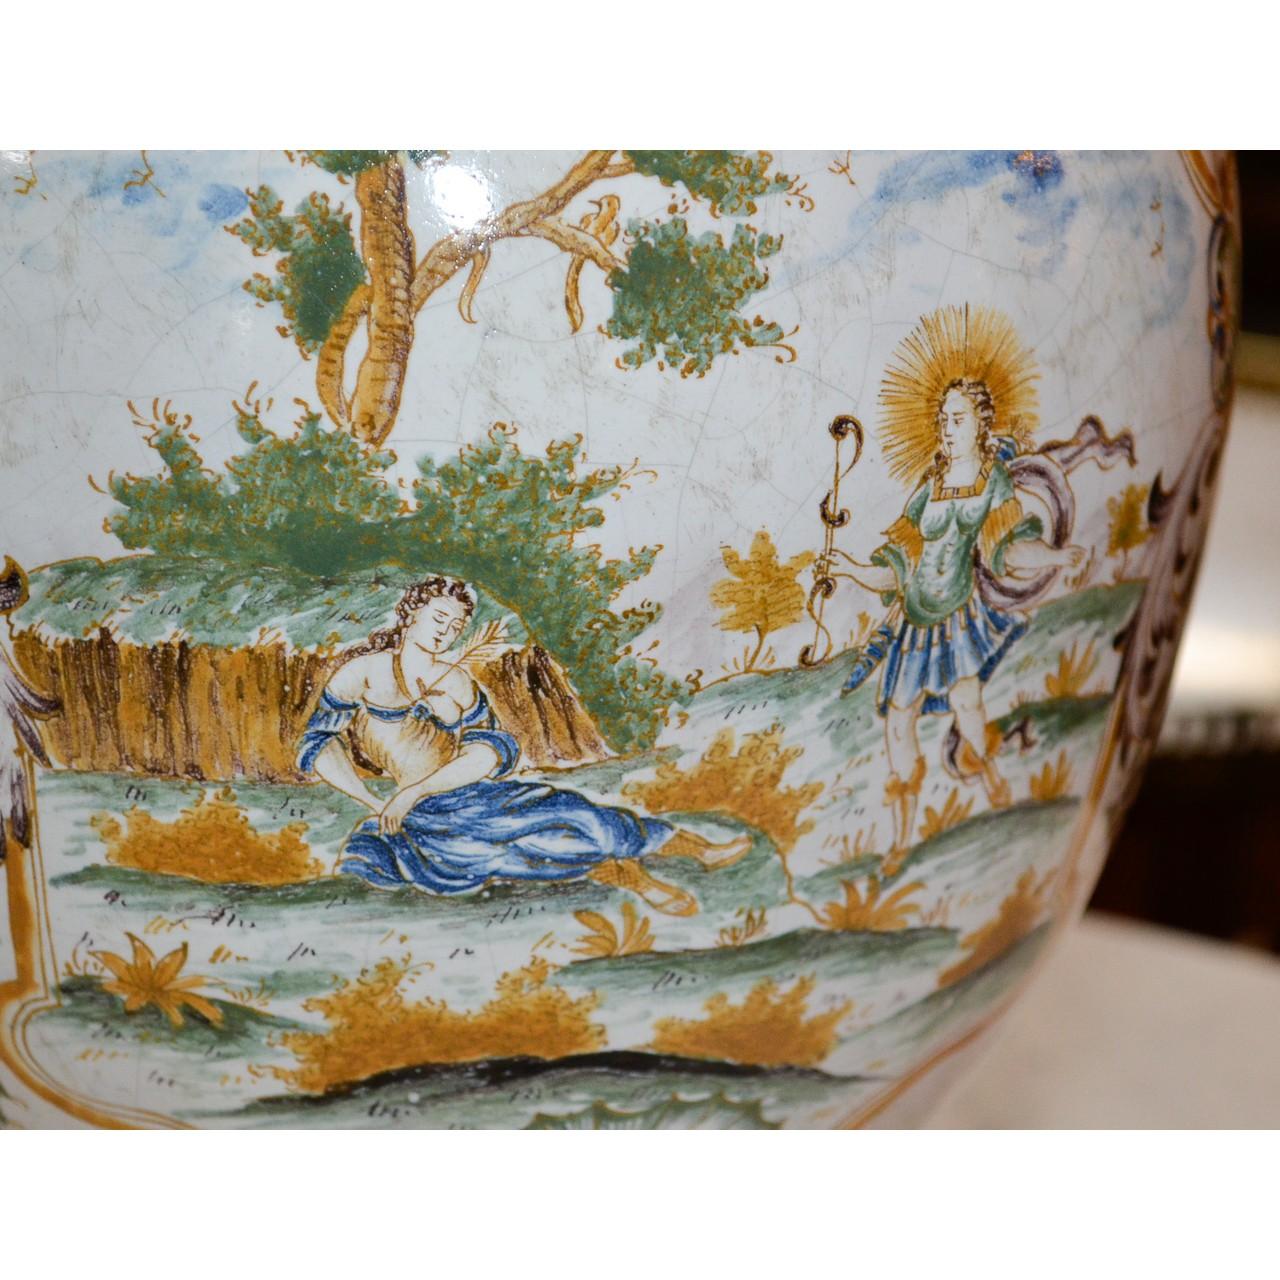 This beautifully decorated faience vase with double handles was made in Italy, circa 1890.
Signature on the bottom. See the last photo for signature.
Measures: 19 inches height x 11.5 inches wide.